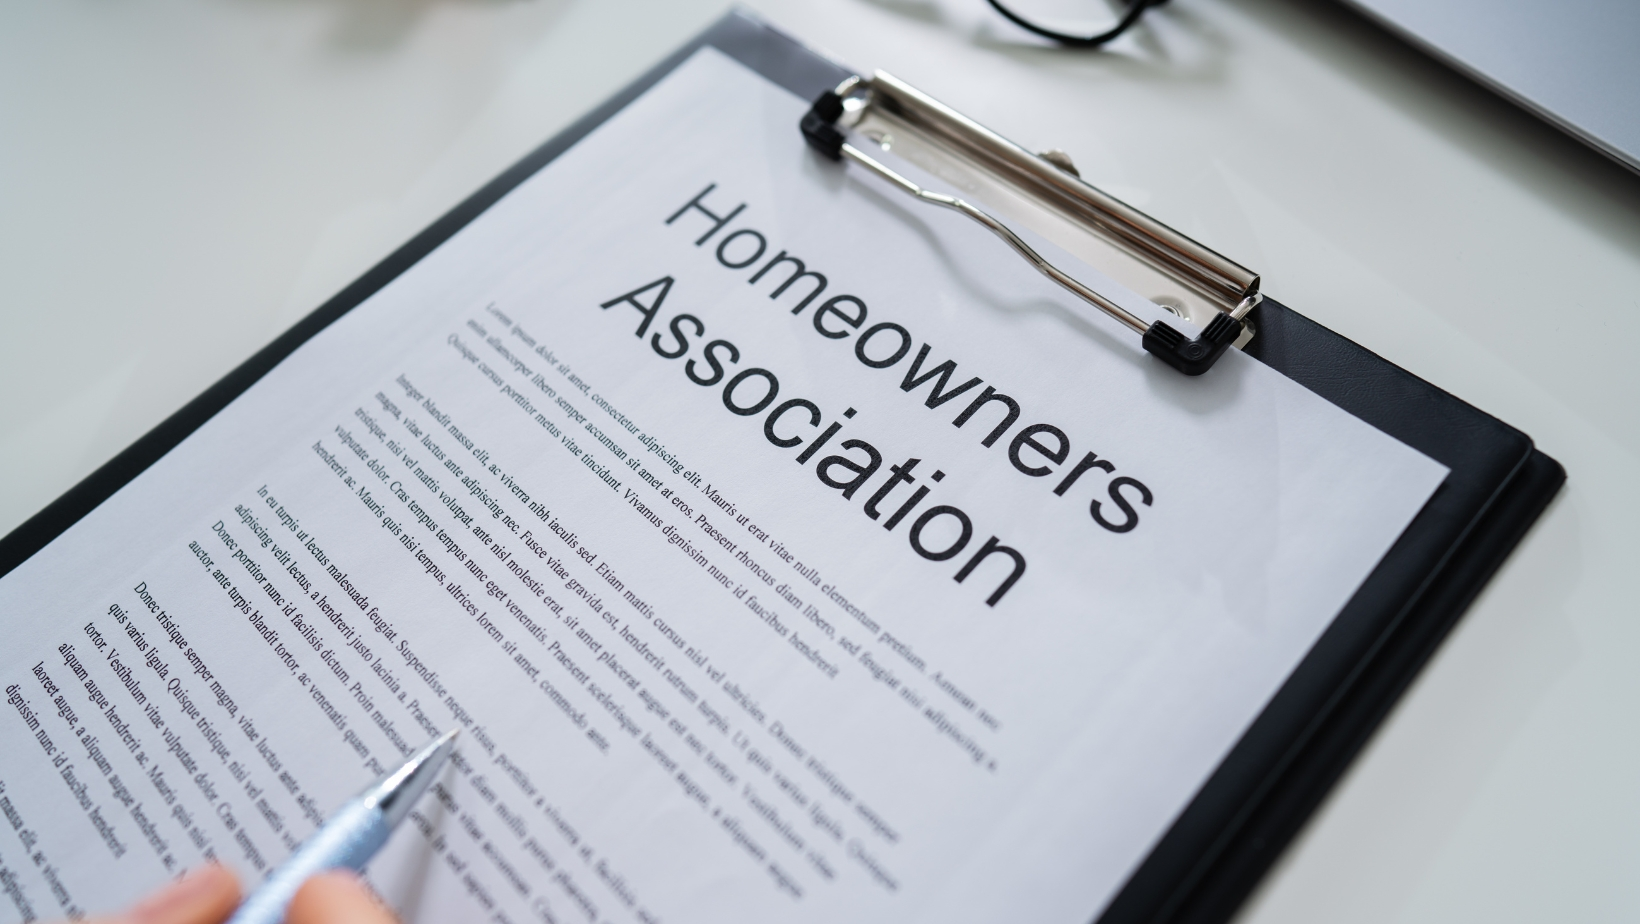 HOA and unit owners should be made aware of HOA's governing documents.